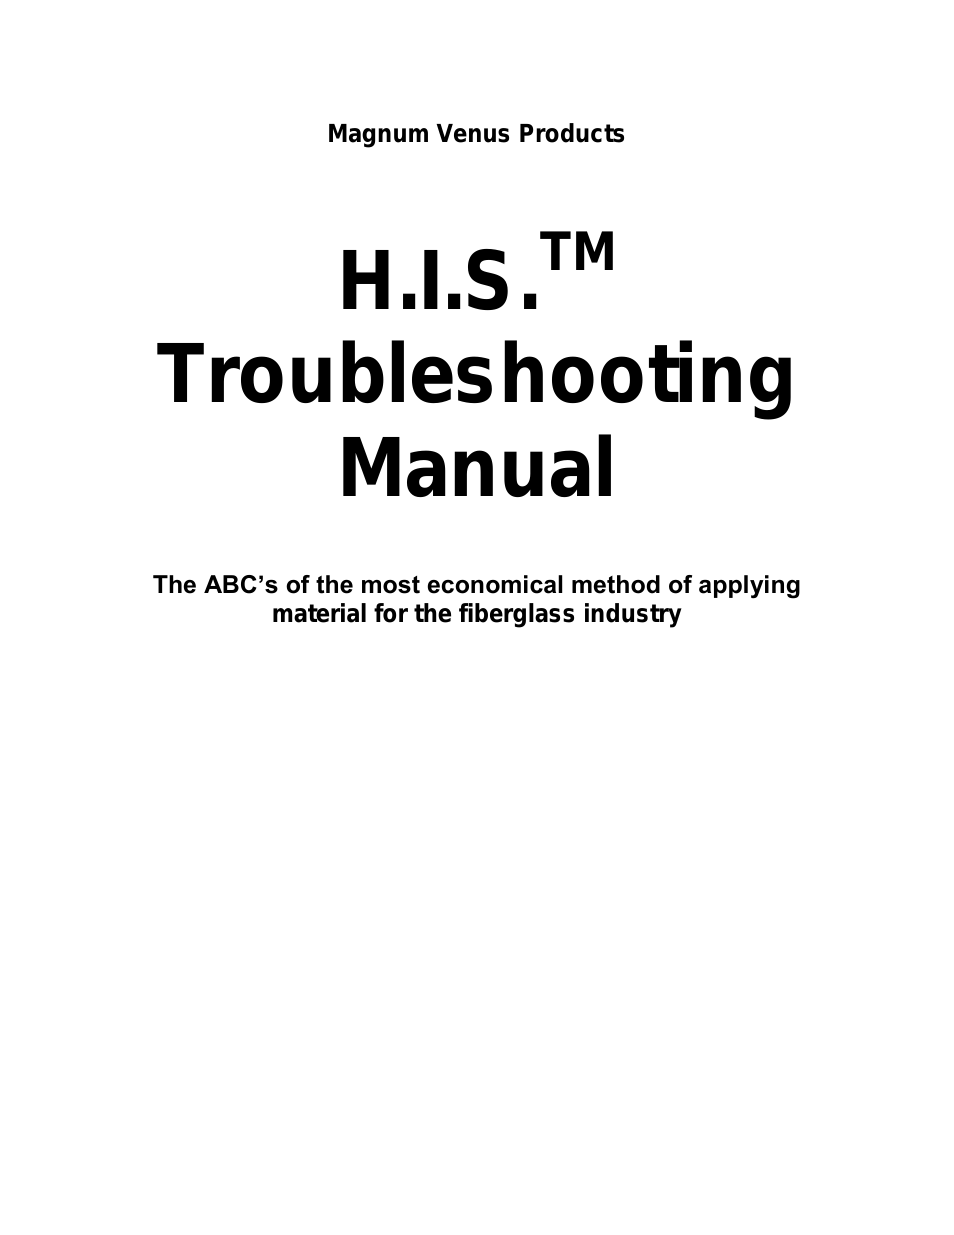 HIS Troubleshooting Manual